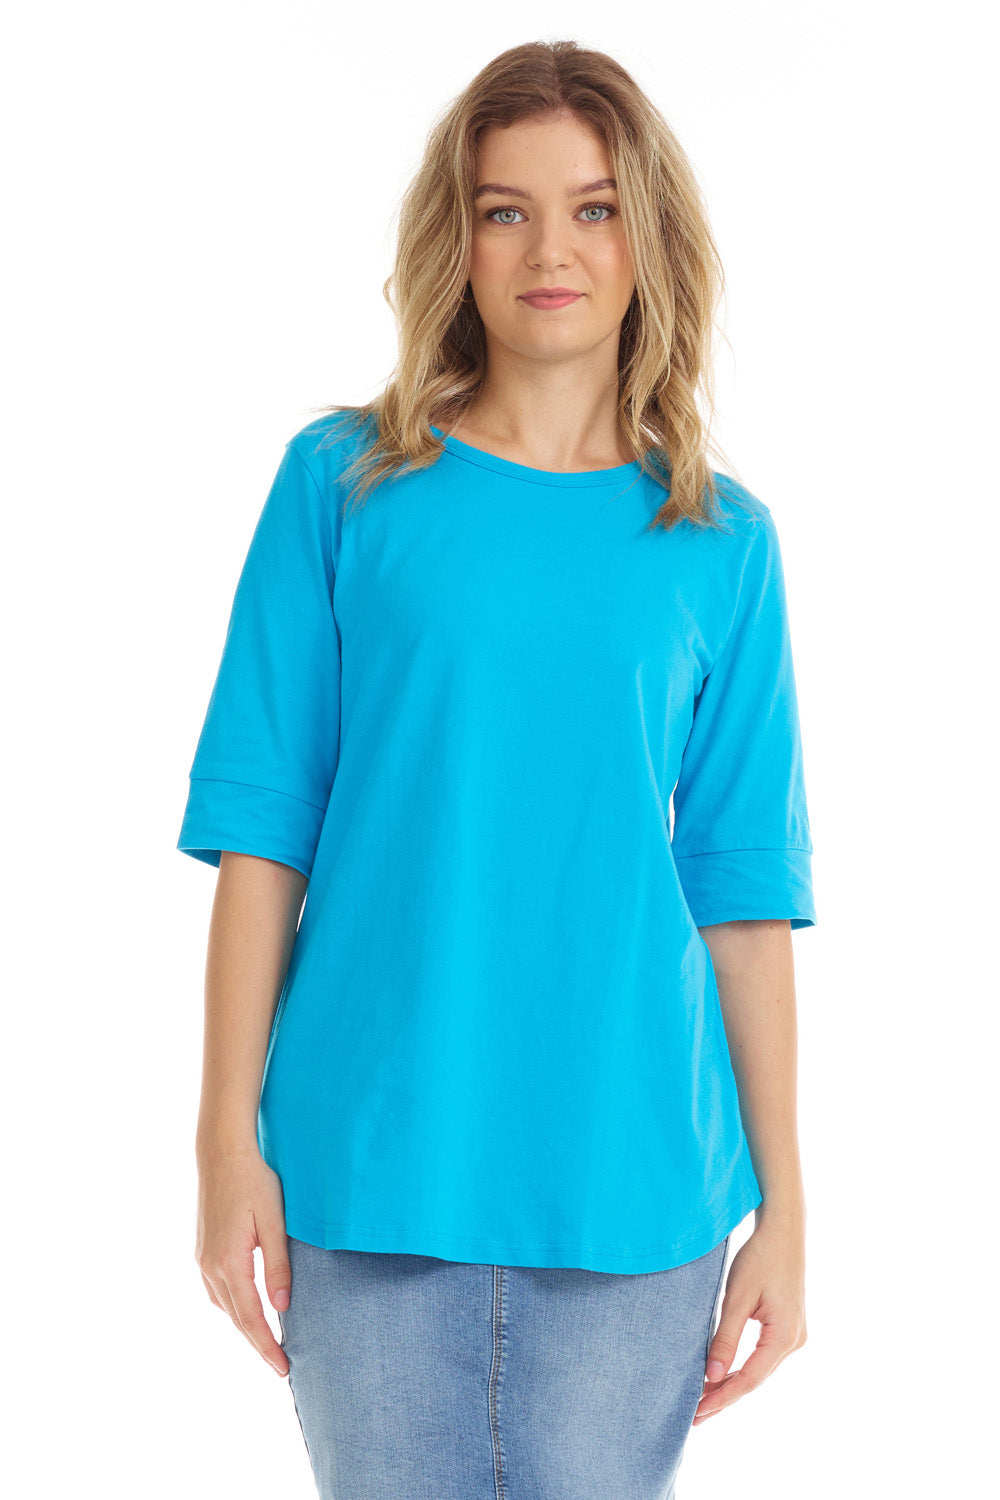 blue cotton elbow sleeve shirt with cuff sleeve